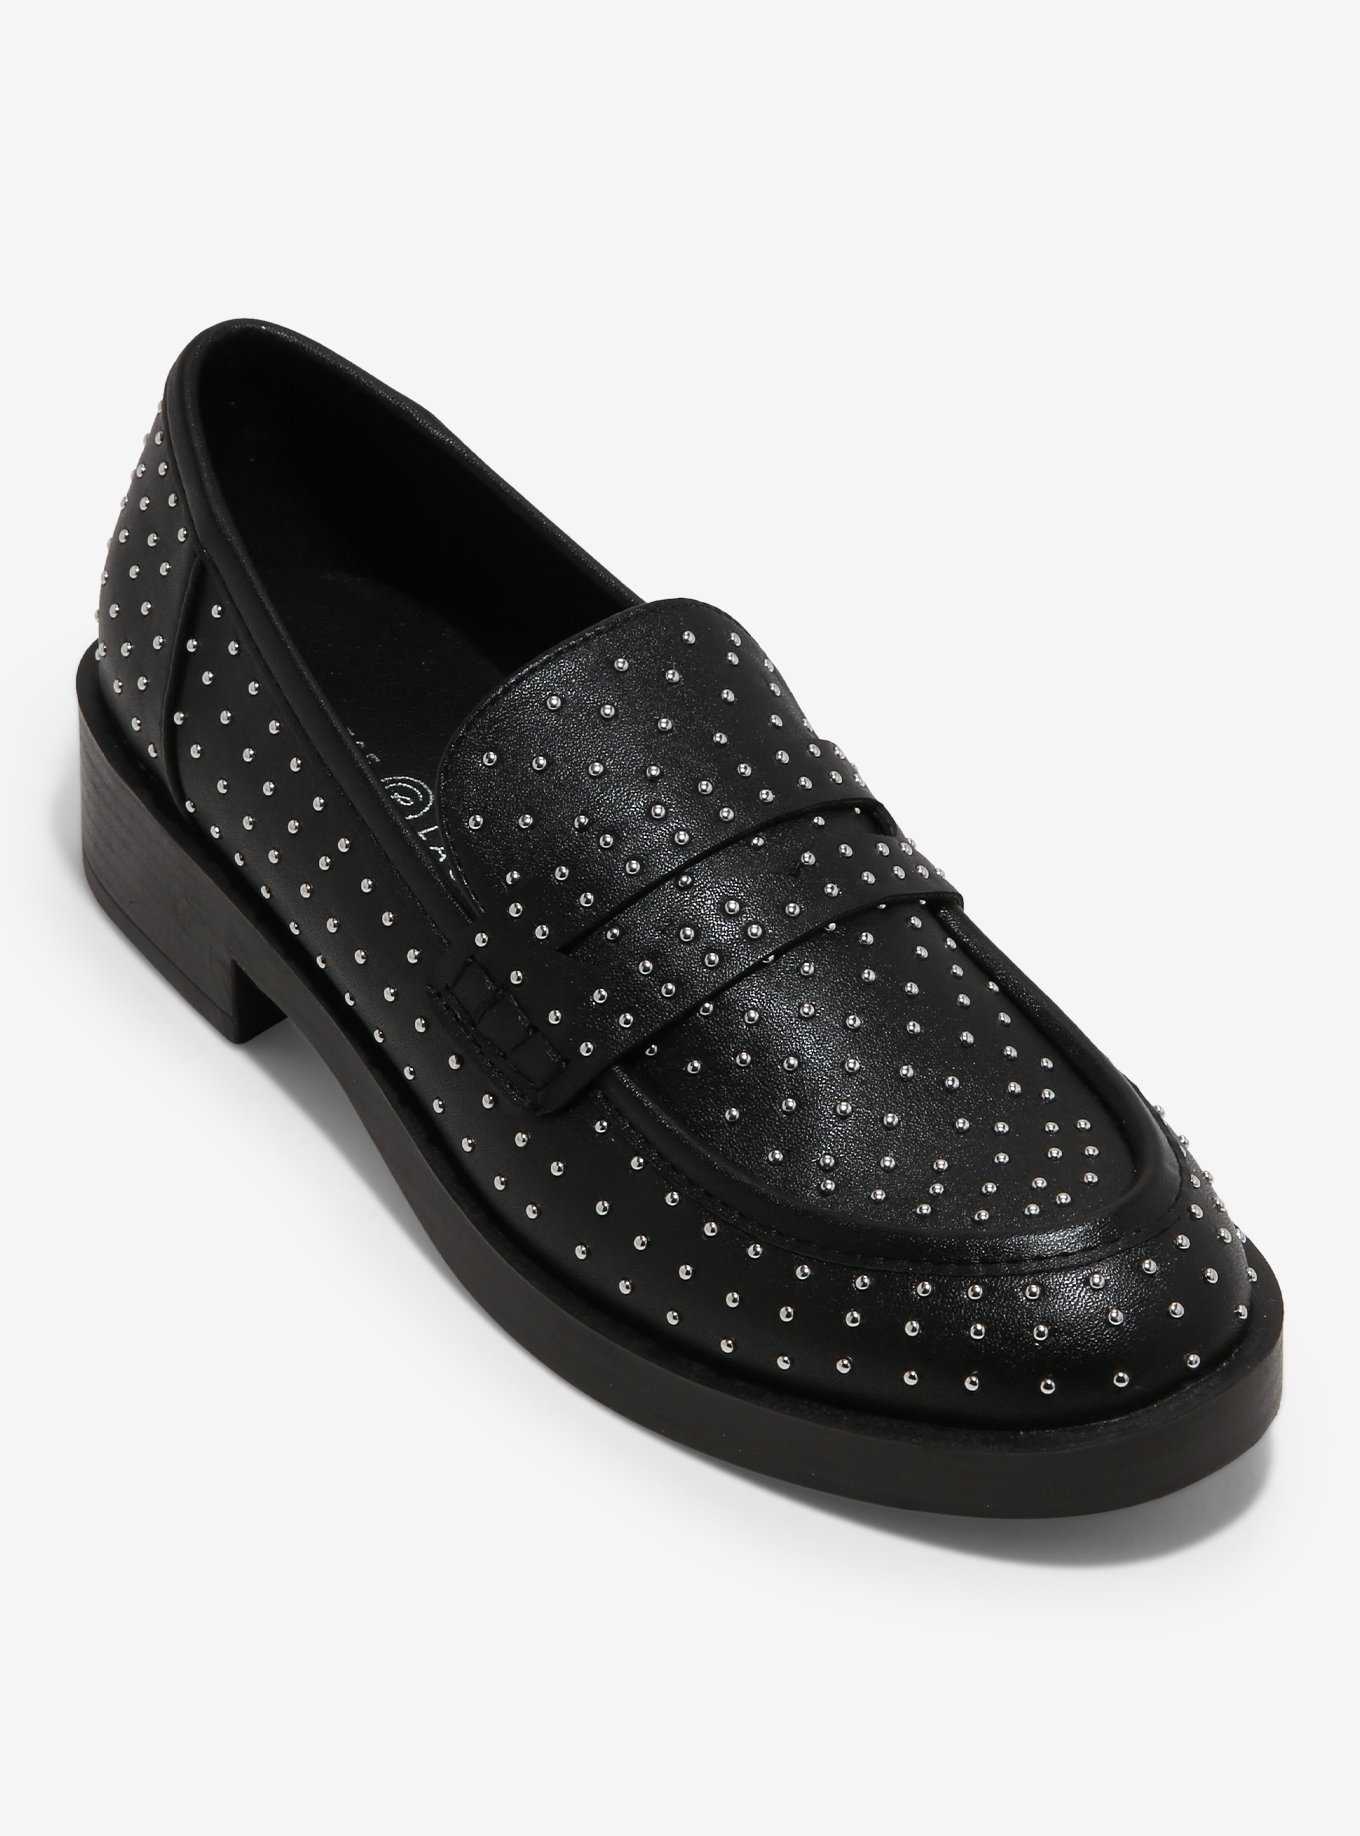 Chinese Laundry Black Studded Loafers, , hi-res